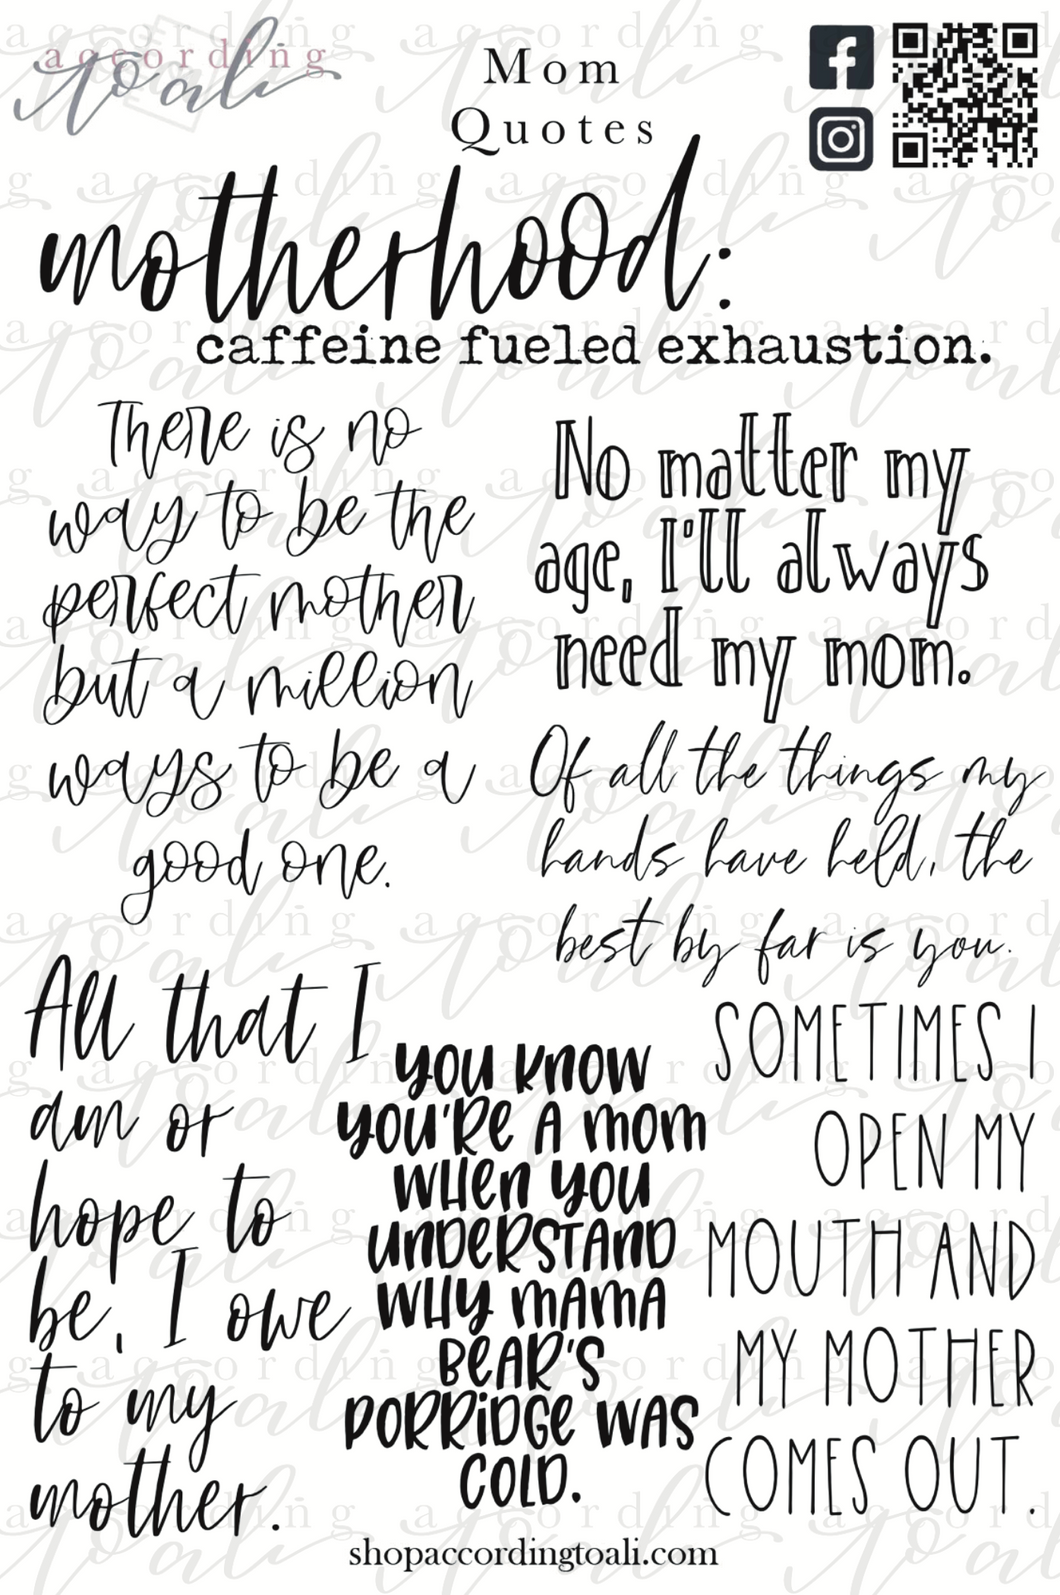 Mom Quotes Sticker Sheets